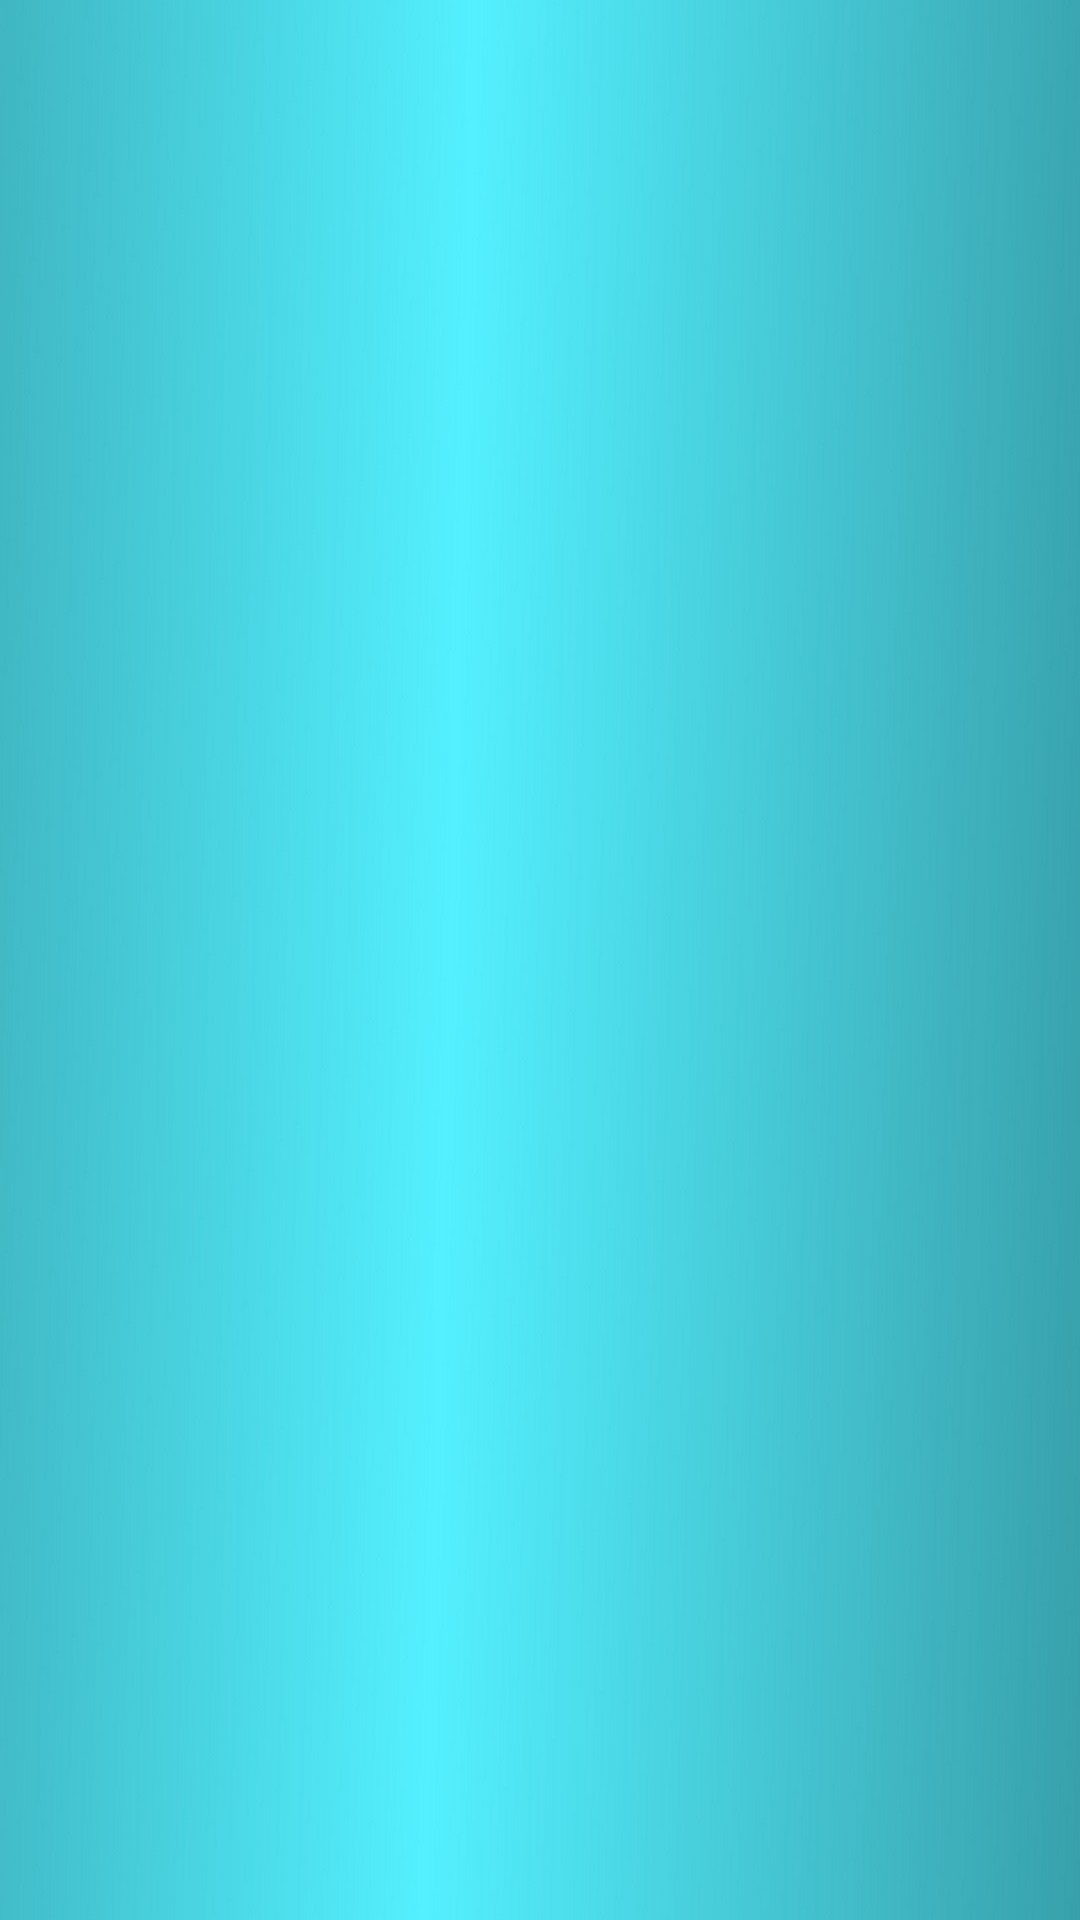 Teal HD Wallpapers For Mobile with image resolution 1080x1920 pixel. You can make this wallpaper for your Desktop Computer Backgrounds, Mac Wallpapers, Android Lock screen or iPhone Screensavers